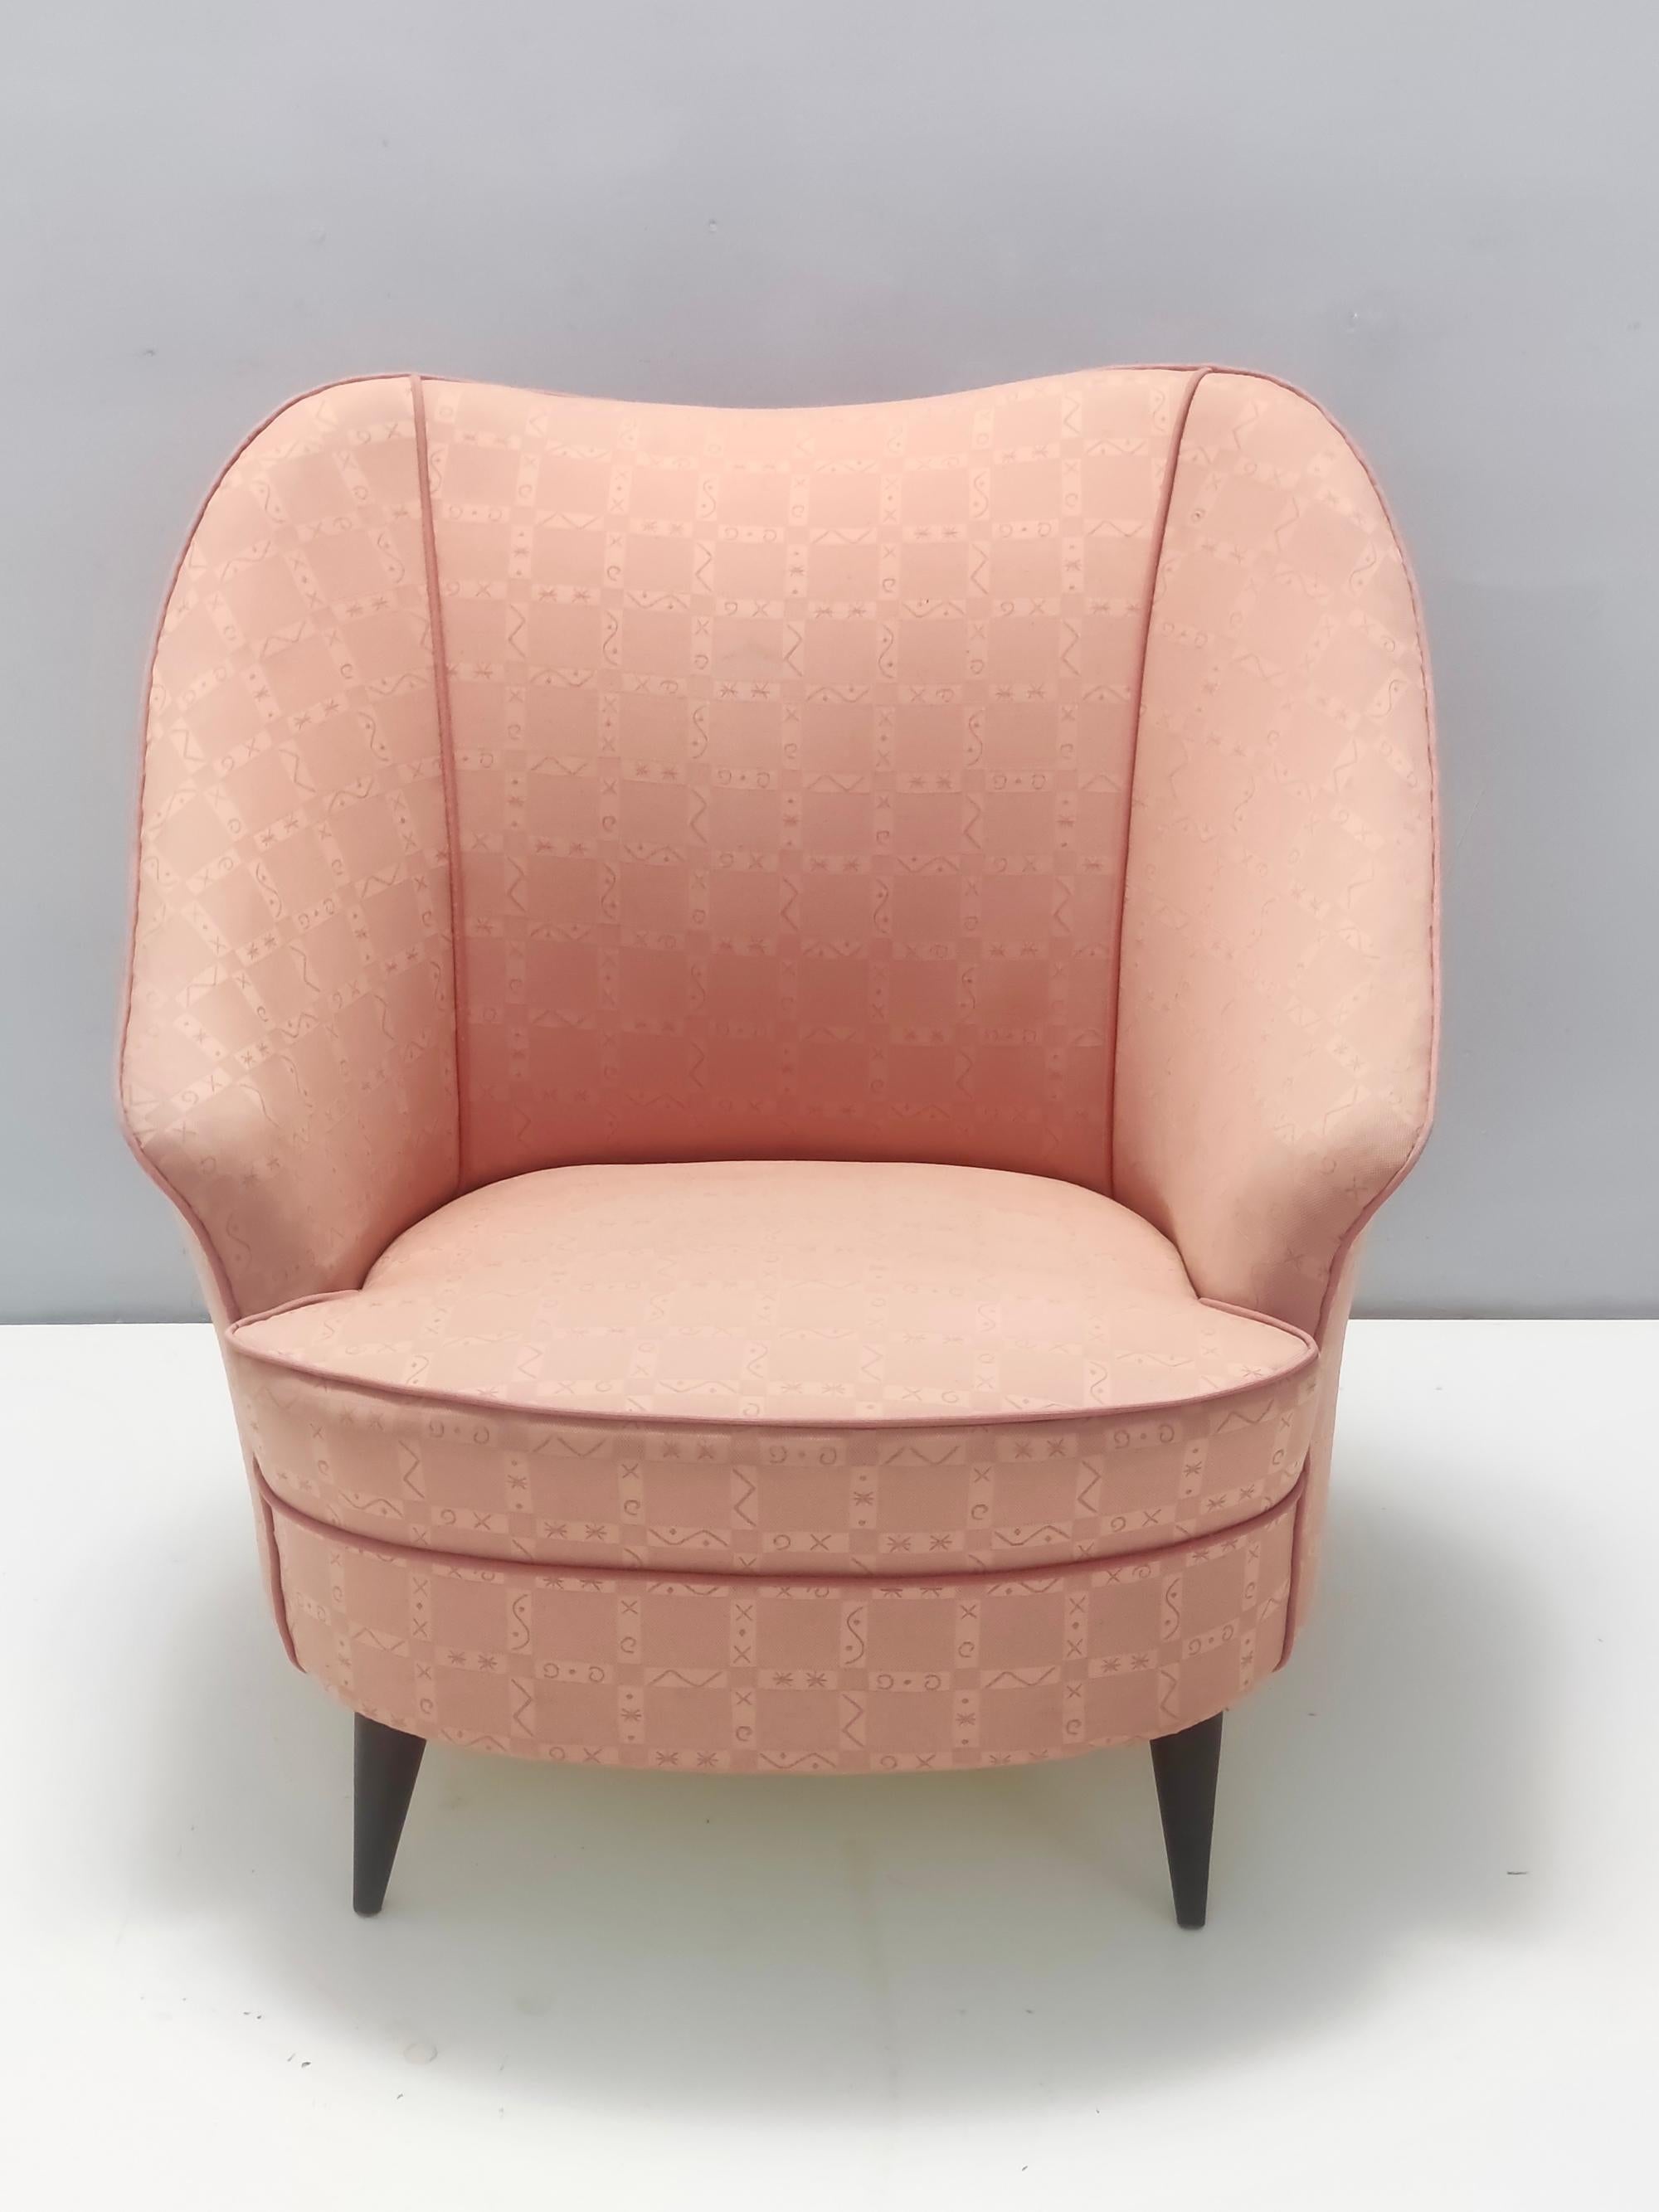 Vintage Peach Pink Lounge Chair in the Style of Gio Ponti for Casa & Giardino In Excellent Condition For Sale In Bresso, Lombardy